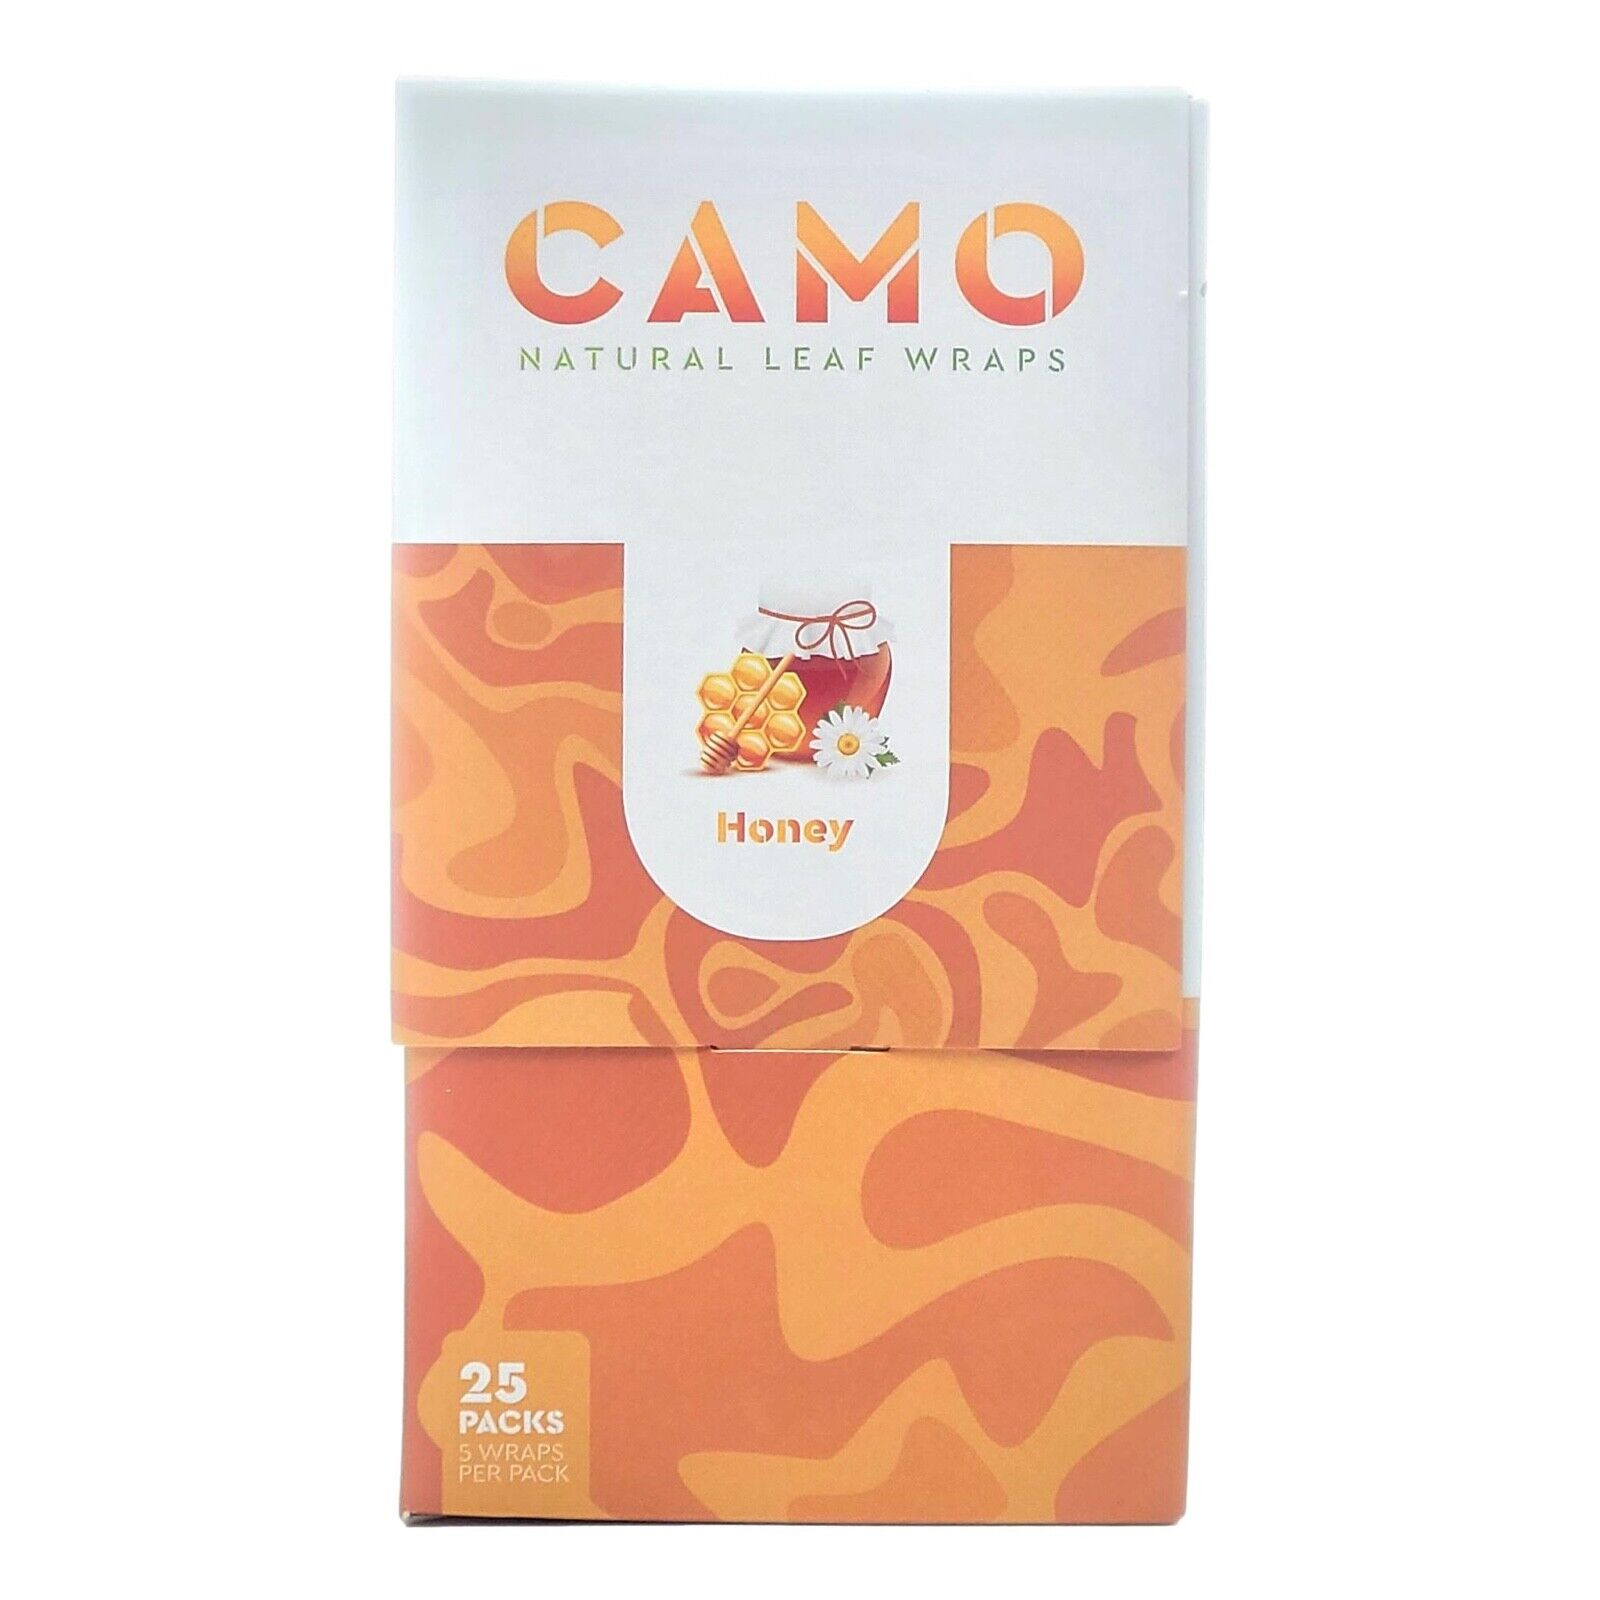 Camo Natural Leaf Herbal Papers 6/5ct Packs Chamomile&Mate 30pc Honey Camo